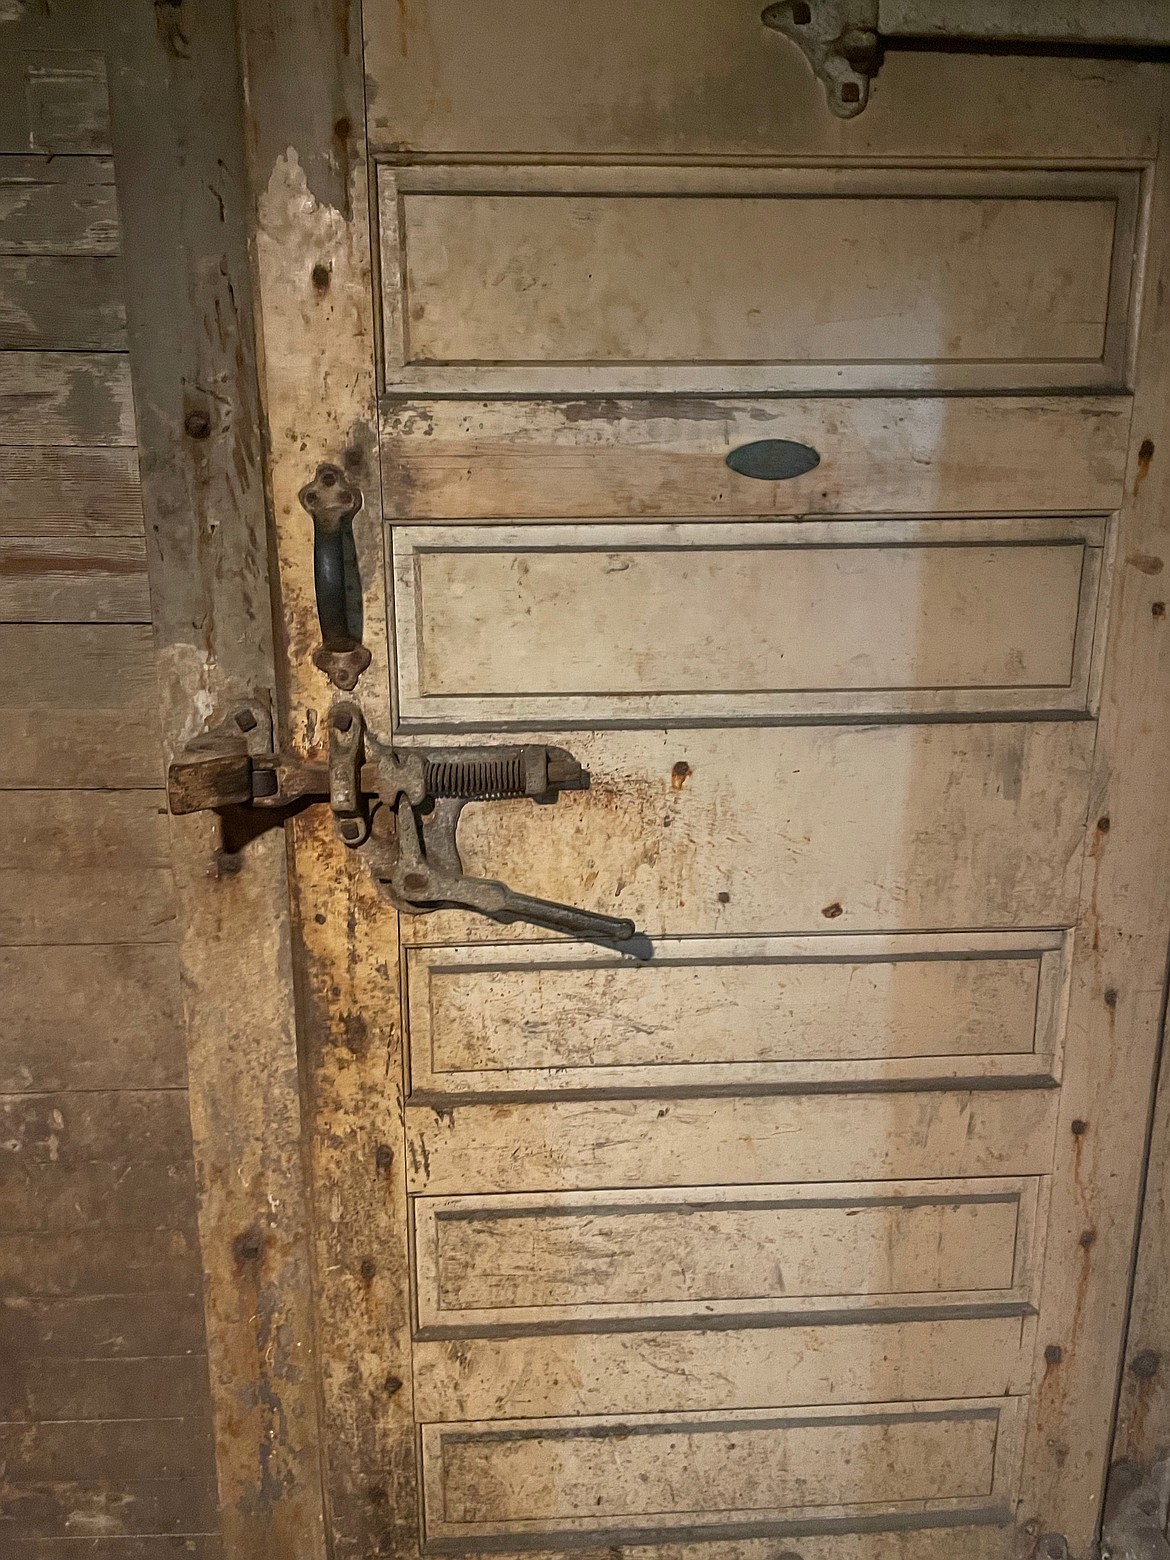 An old freezer door in the basement of the Metals that harkens back to the building's history as a meat distributor.